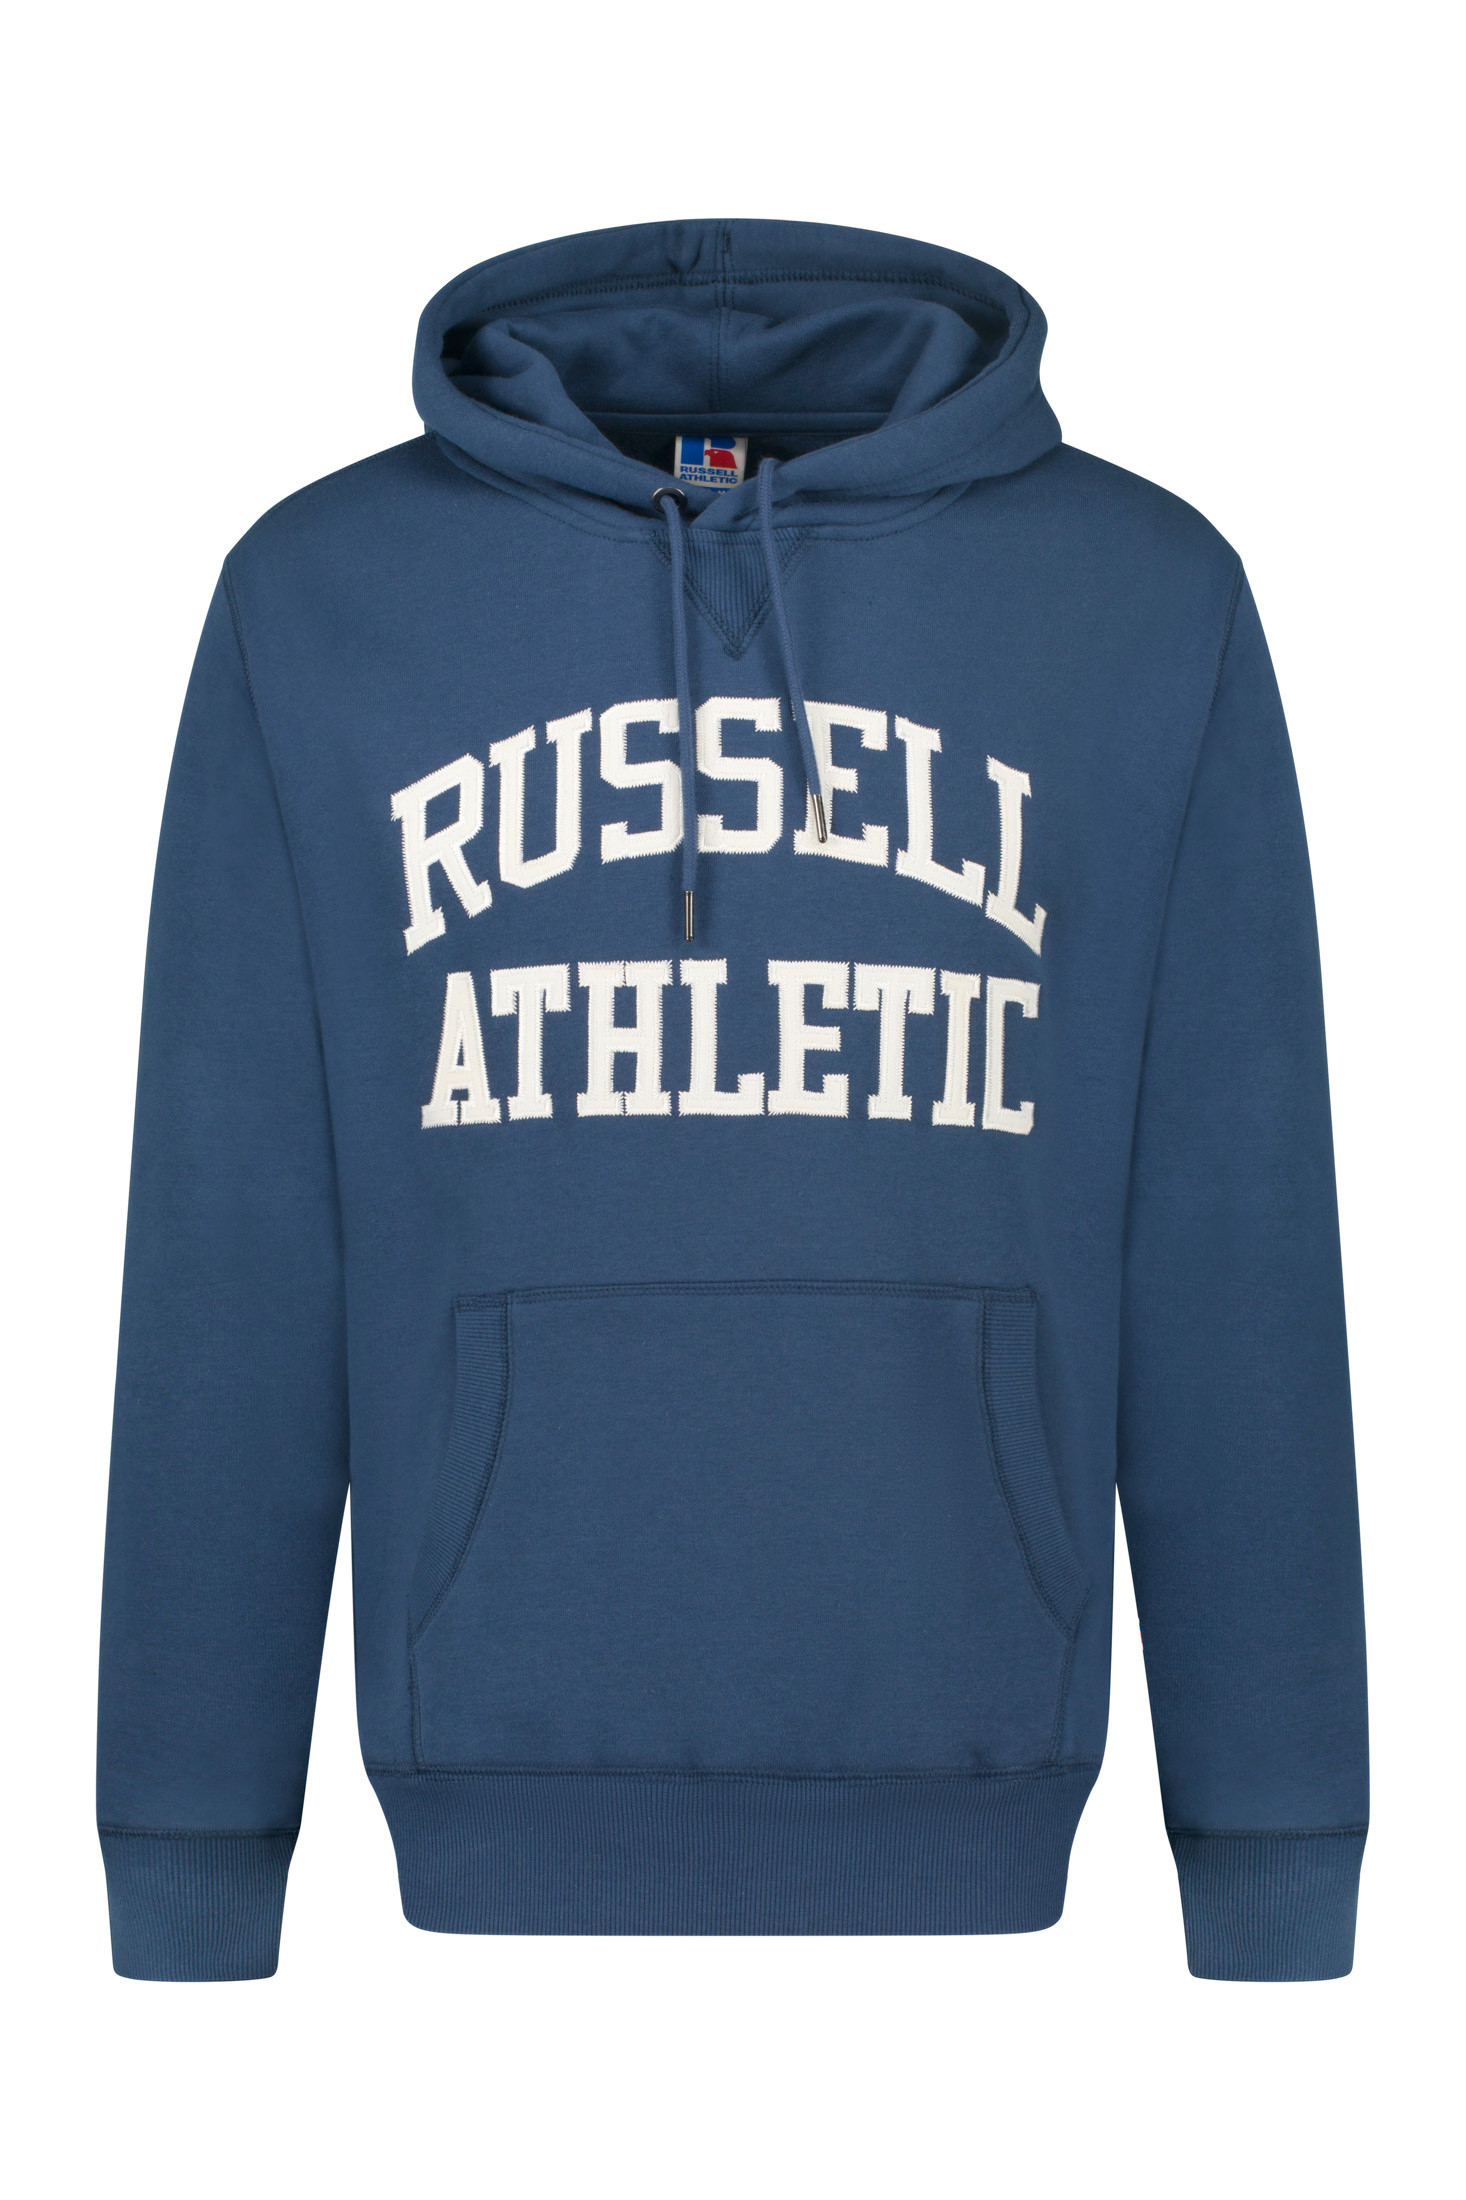 Russell Athletic - Hoodie, Blue, large image number 0